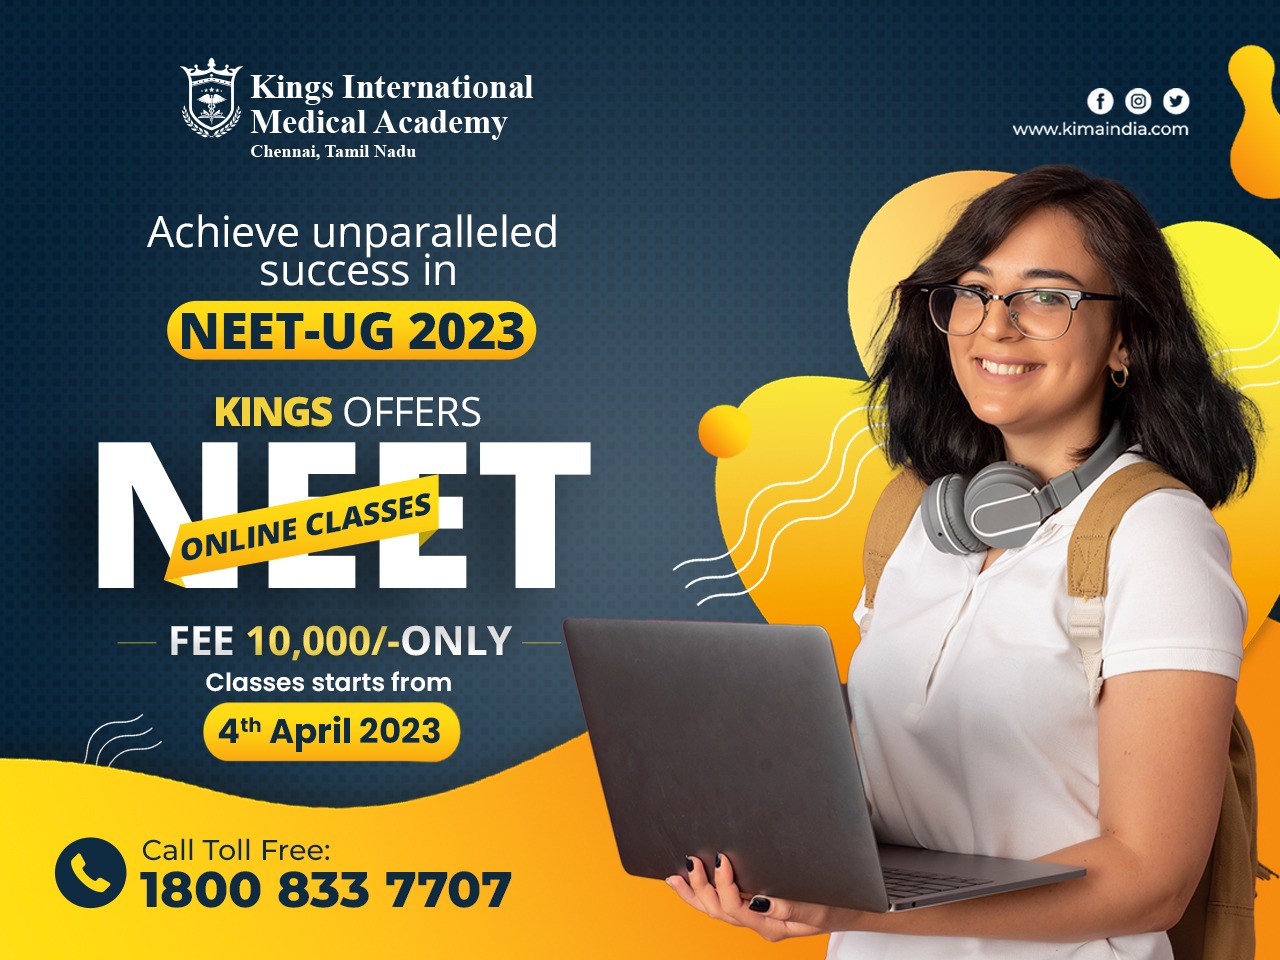 Crush the NEET Exam with Kings International Medical Academy's Online Classes Starting from April 4th!